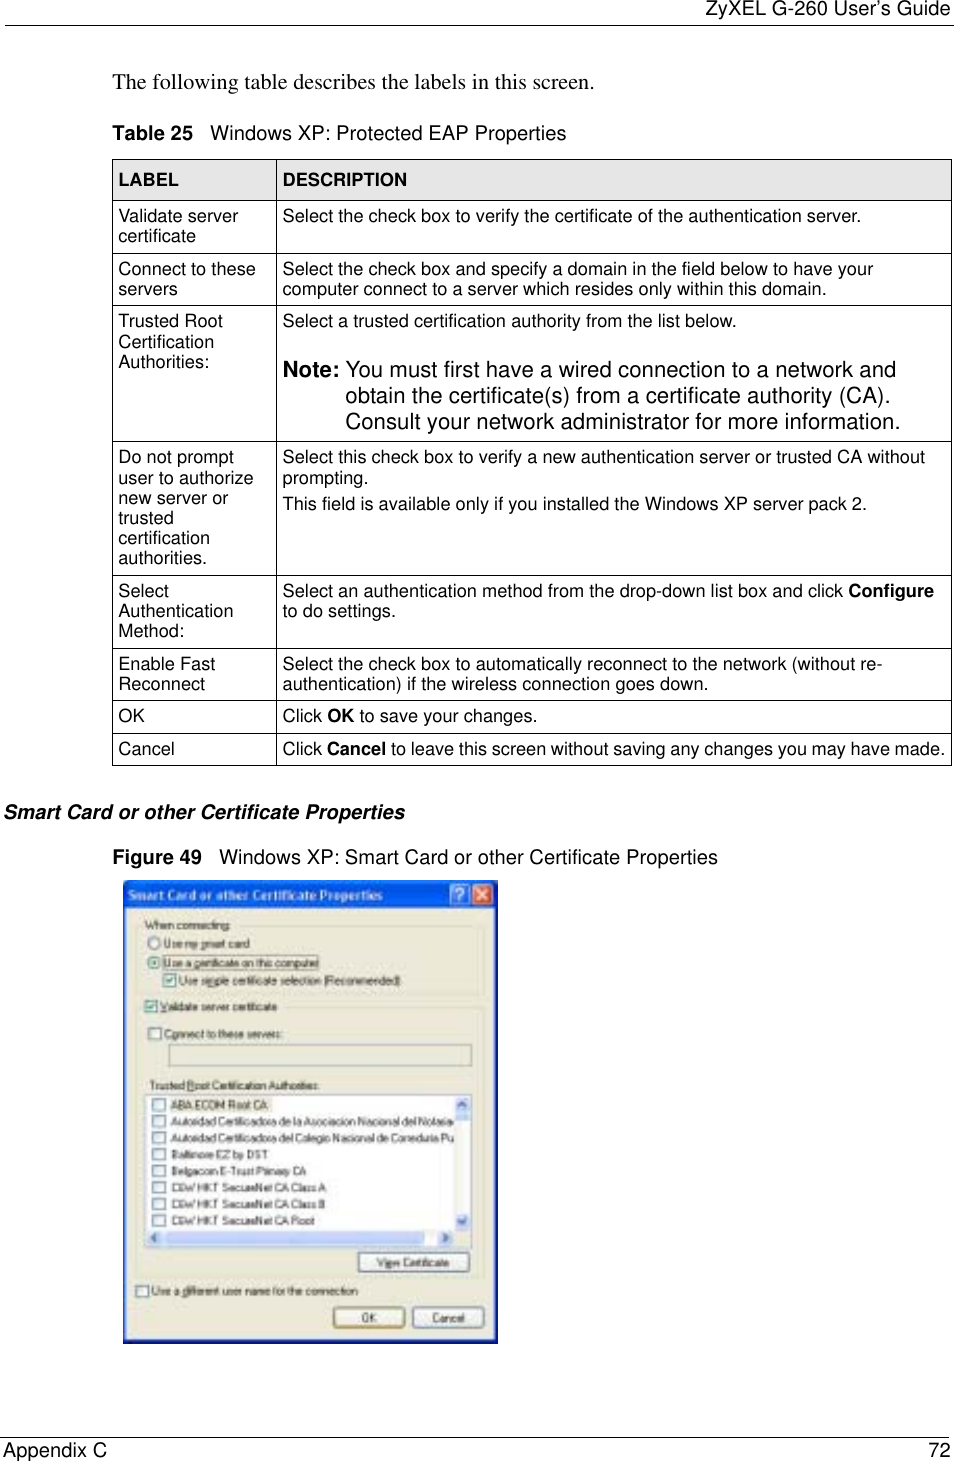 ZyXEL G-260 User’s GuideAppendix C 72The following table describes the labels in this screen.Smart Card or other Certificate PropertiesFigure 49   Windows XP: Smart Card or other Certificate PropertiesTable 25   Windows XP: Protected EAP PropertiesLABEL DESCRIPTIONValidate server certificate Select the check box to verify the certificate of the authentication server.Connect to these servers Select the check box and specify a domain in the field below to have your computer connect to a server which resides only within this domain.Trusted Root Certification Authorities:Select a trusted certification authority from the list below.Note: You must first have a wired connection to a network and obtain the certificate(s) from a certificate authority (CA). Consult your network administrator for more information.Do not prompt user to authorize new server or trusted certification authorities.Select this check box to verify a new authentication server or trusted CA without prompting.This field is available only if you installed the Windows XP server pack 2.Select Authentication Method:Select an authentication method from the drop-down list box and click Configureto do settings.Enable Fast Reconnect Select the check box to automatically reconnect to the network (without re-authentication) if the wireless connection goes down.OK Click OK to save your changes.Cancel Click Cancel to leave this screen without saving any changes you may have made.